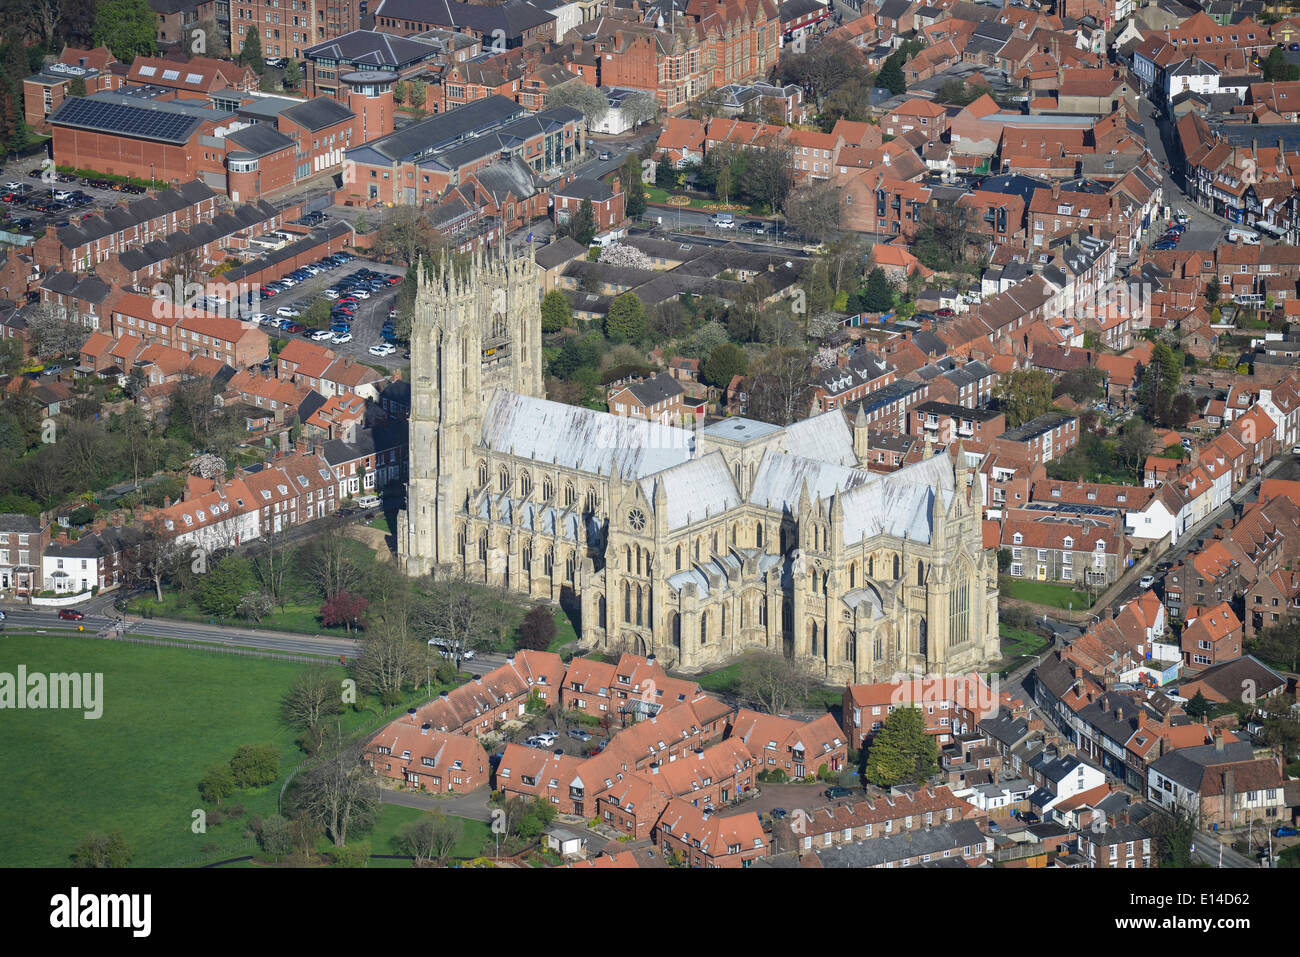 An aerial view of Beverley Minster and immediate surroundings - Beverley, East Yorkshire Stock Photo